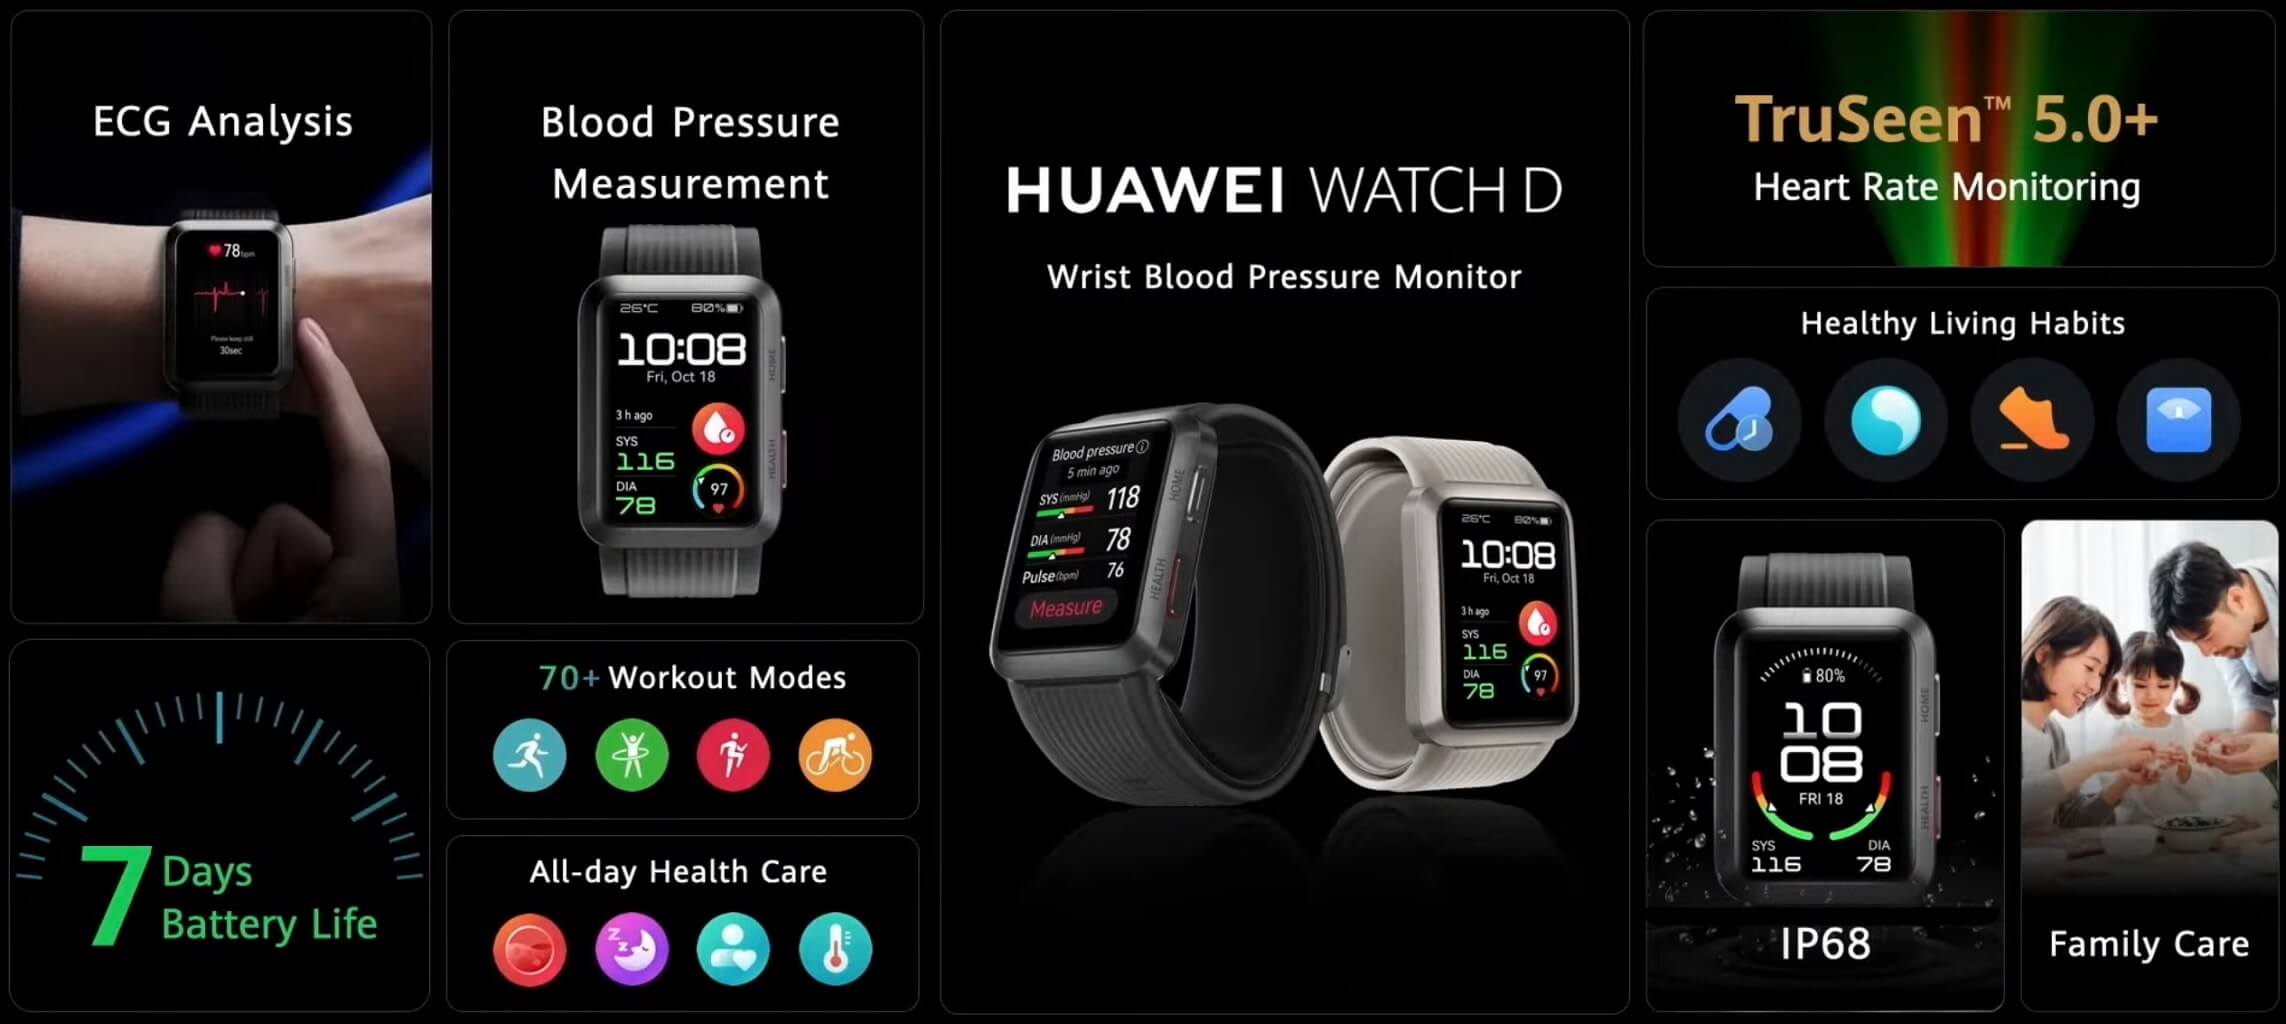 Huawei Watch D features Global